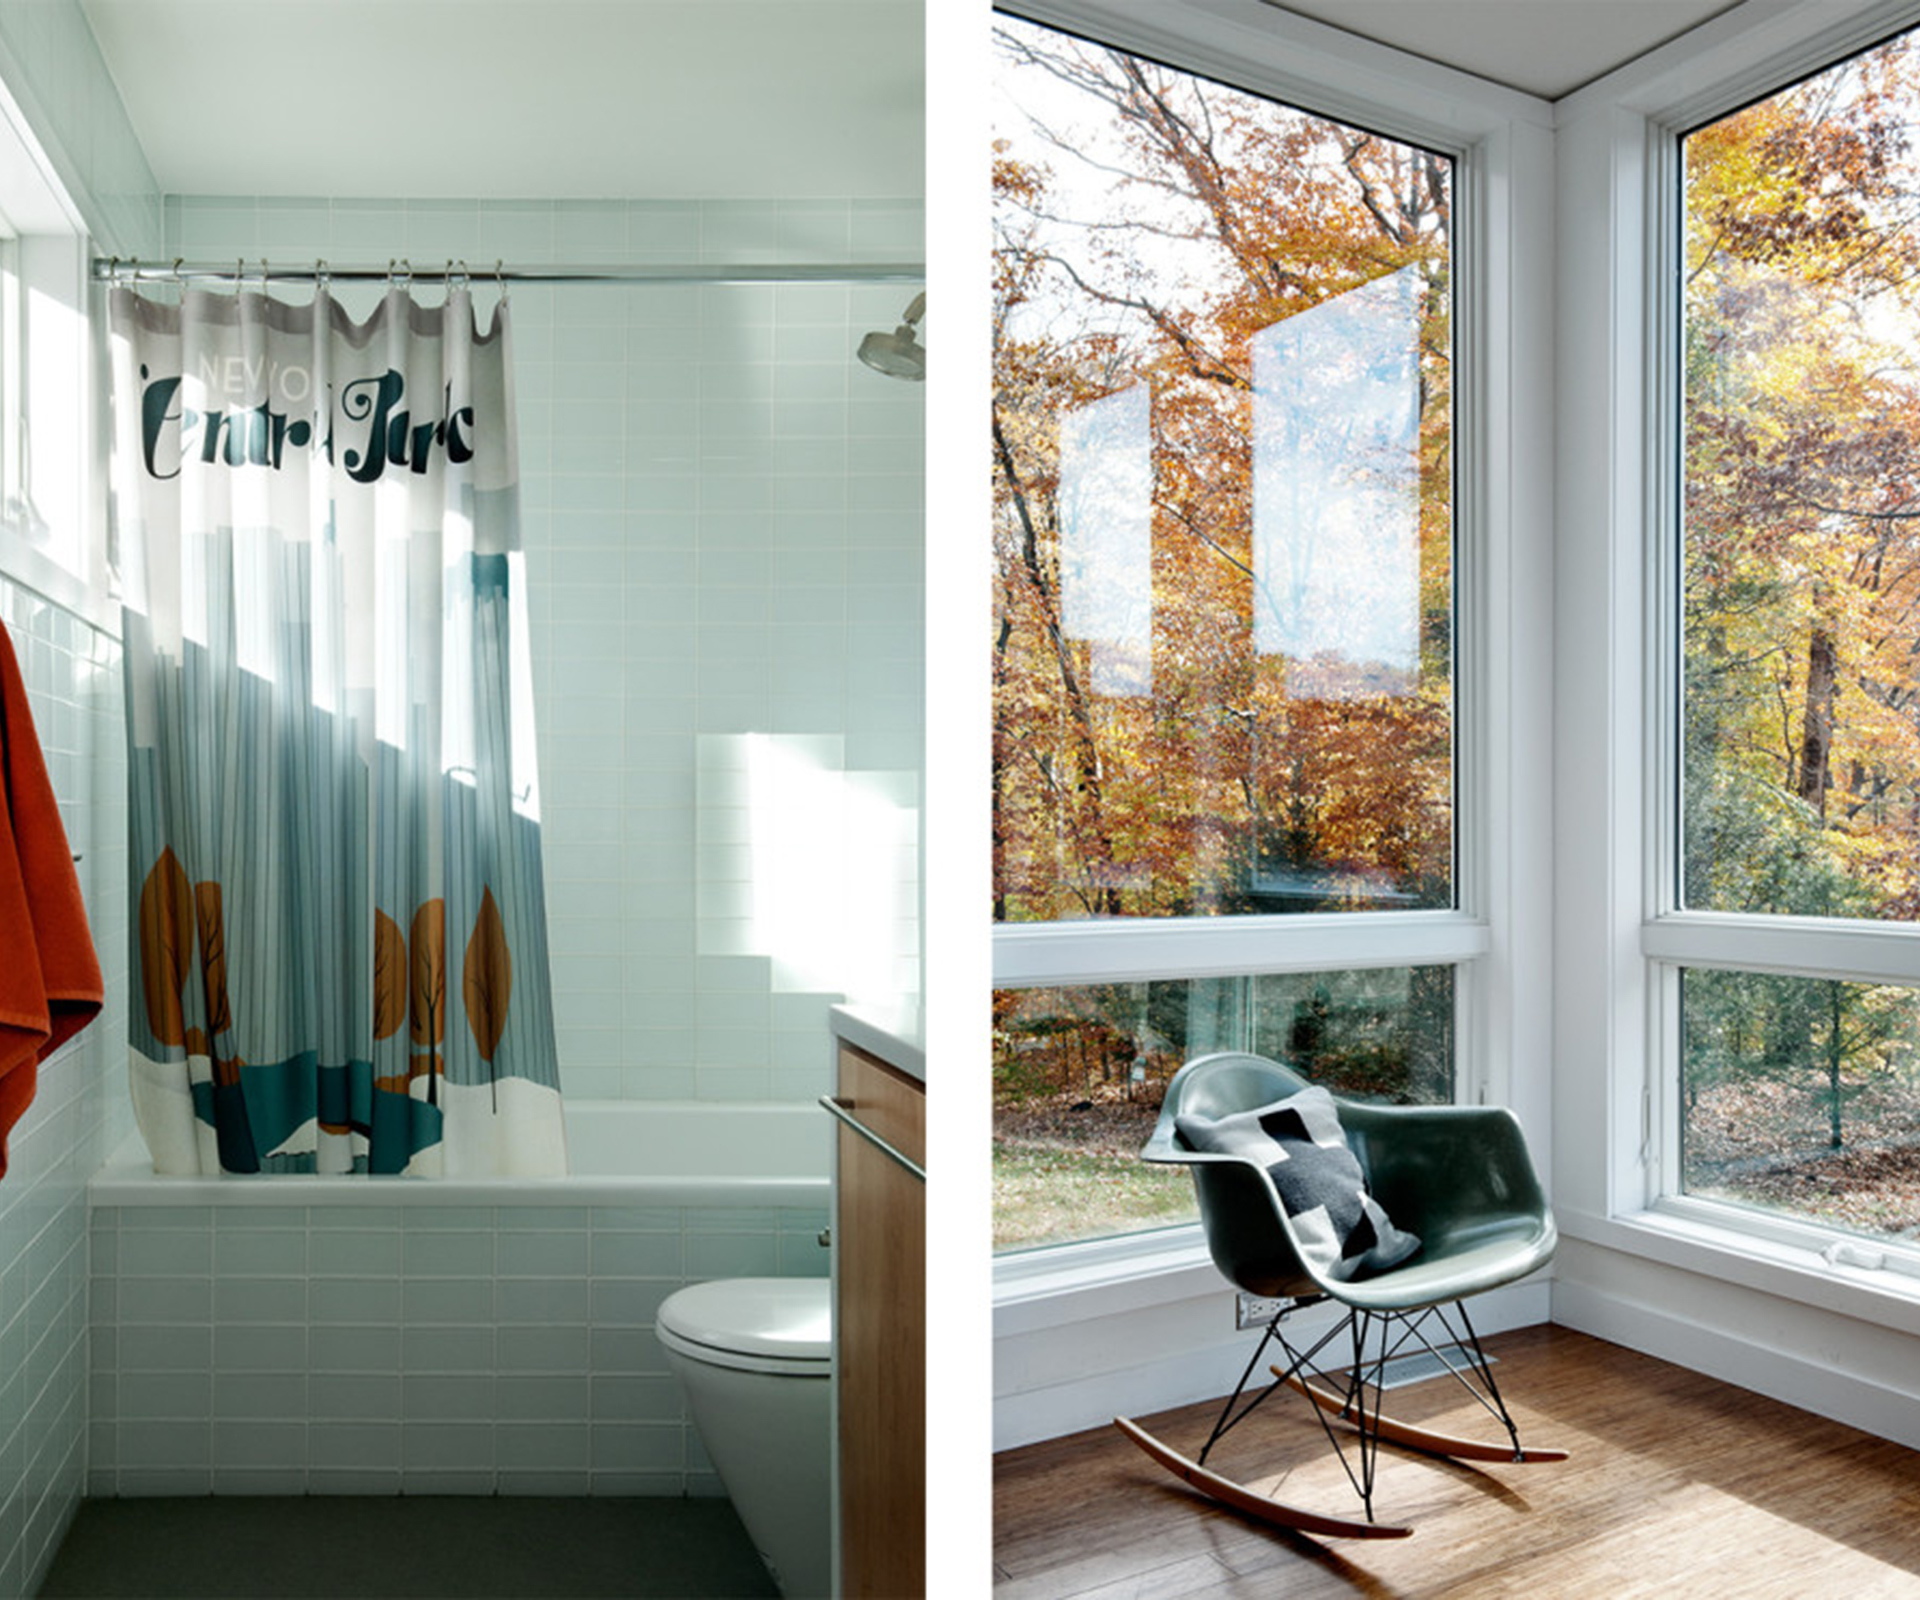 The bathroom (left) was kept simple, with clear glass tiles installed throughout. Surrounded by glass, a corner spot (right) is simply furnished with an Eames chair.